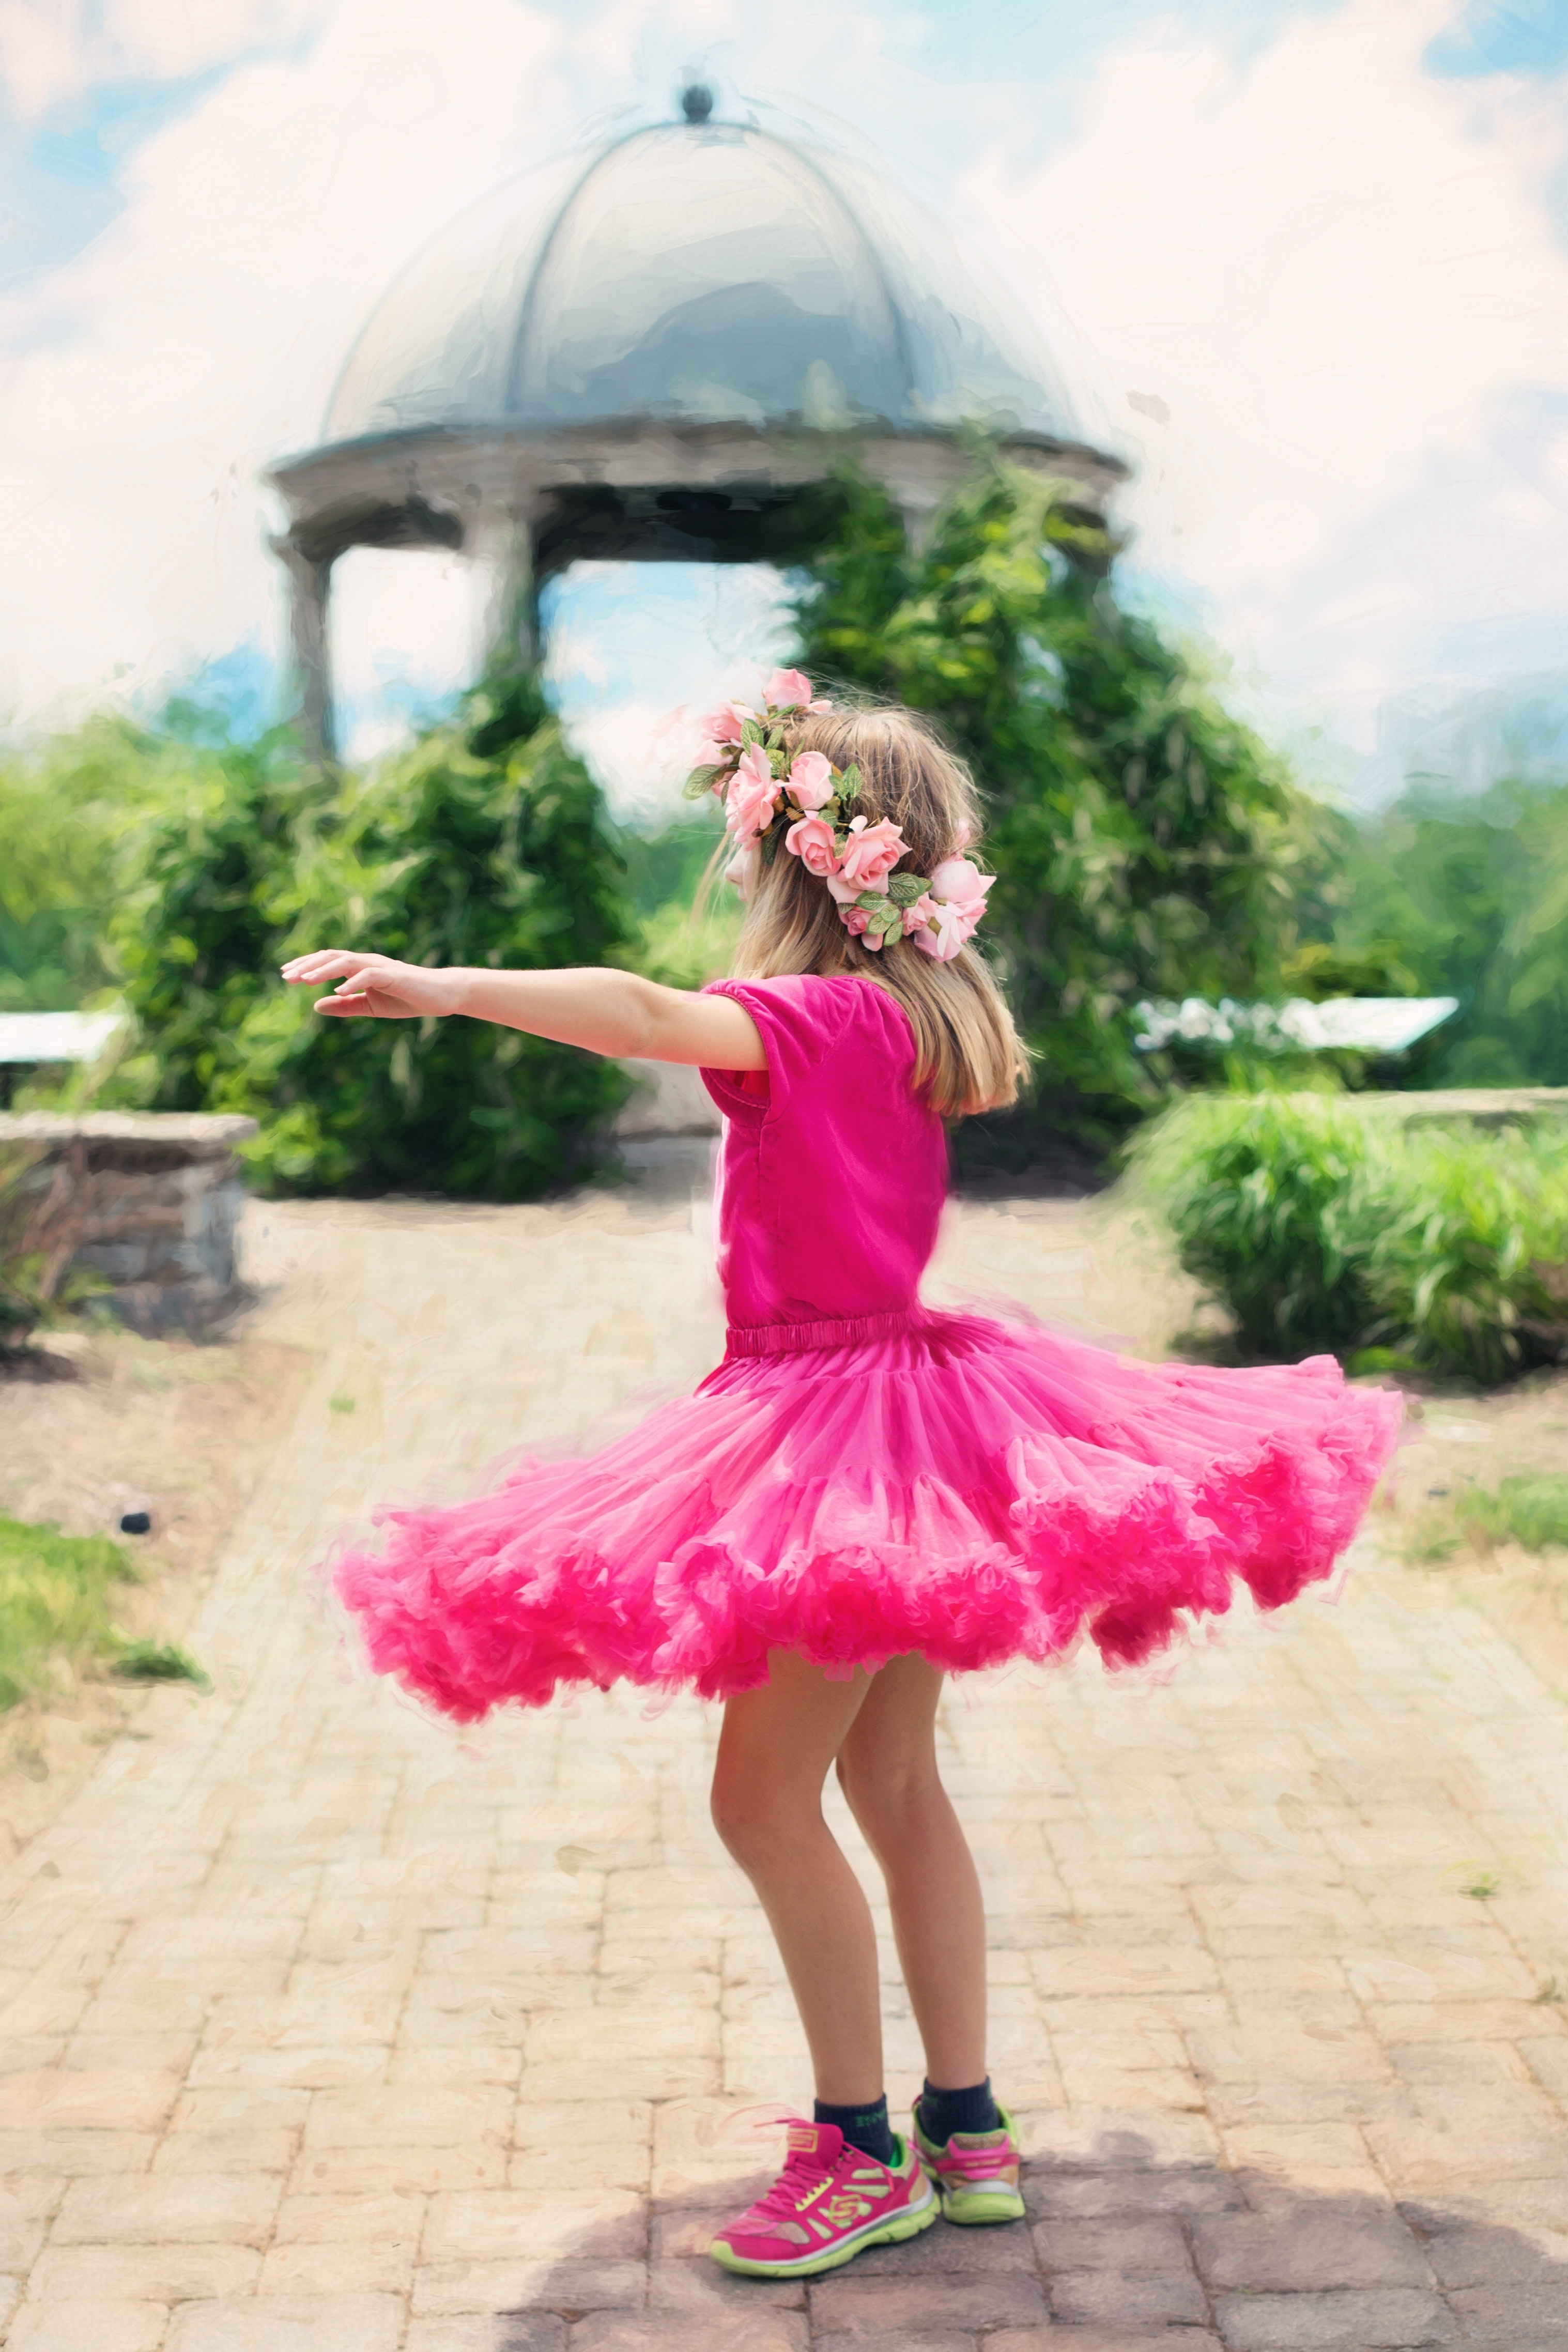 Free stock photo of dancing, little girl twirling, outdoors